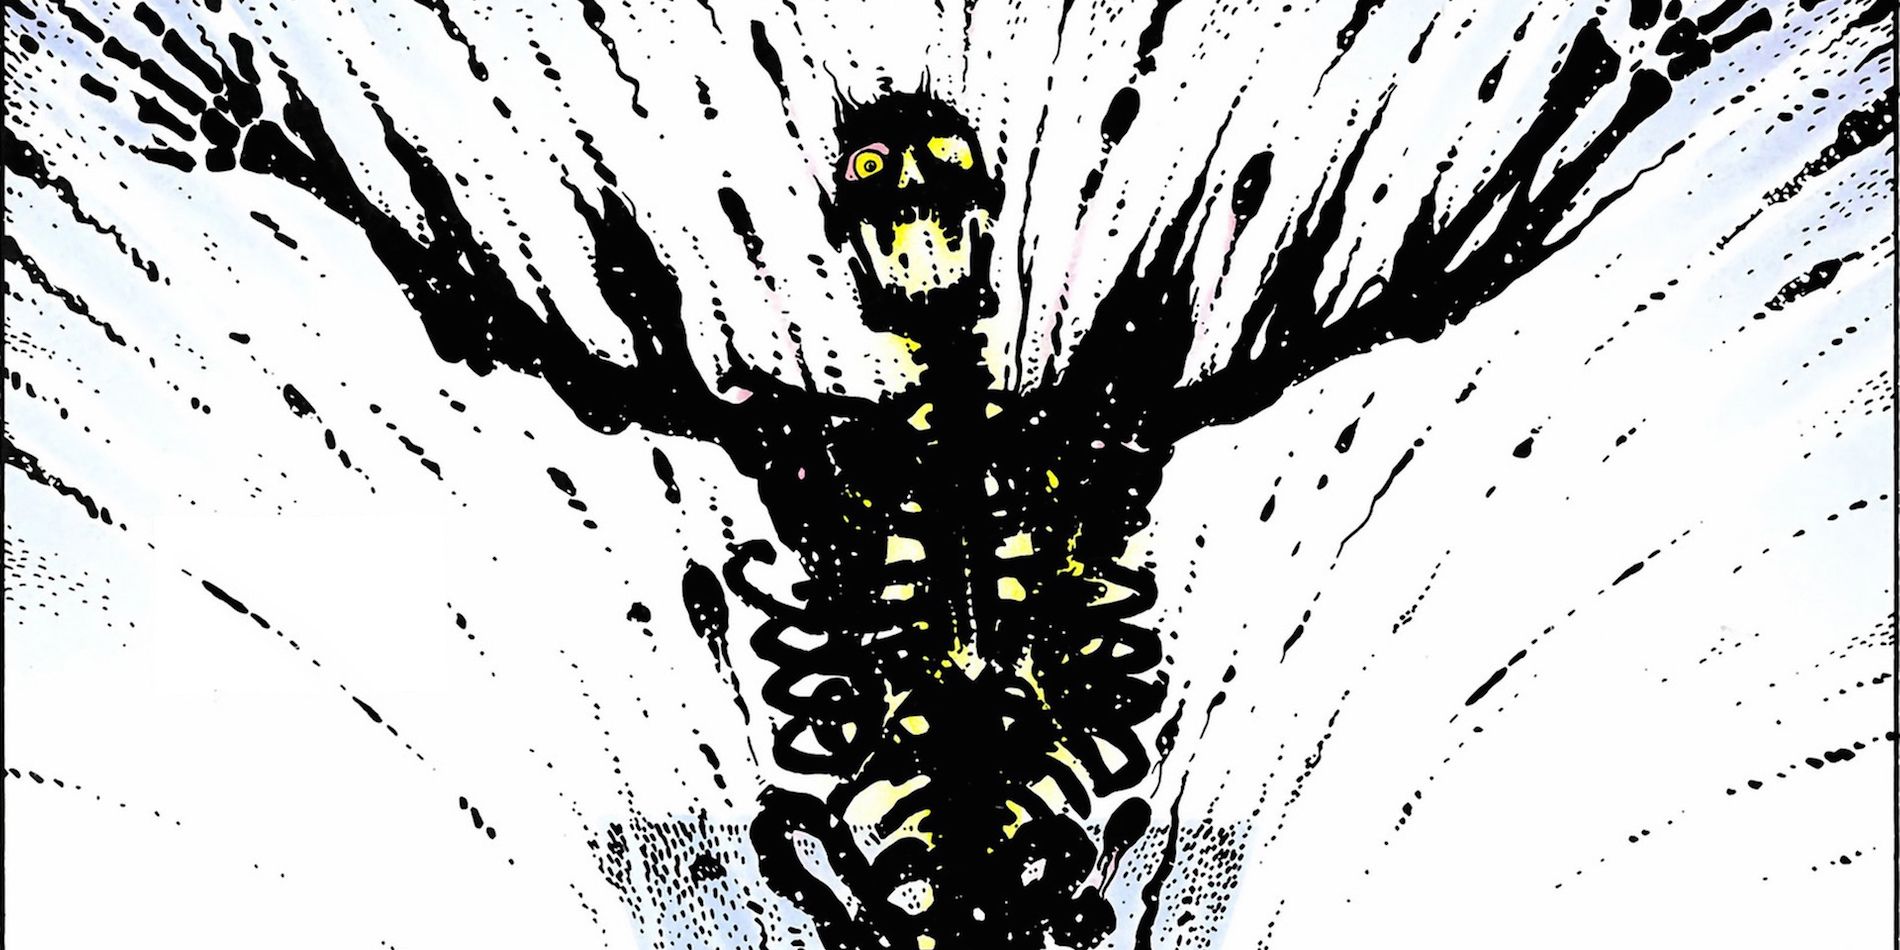 Death and birth of Dr. Manhattan in the Watchmen comic